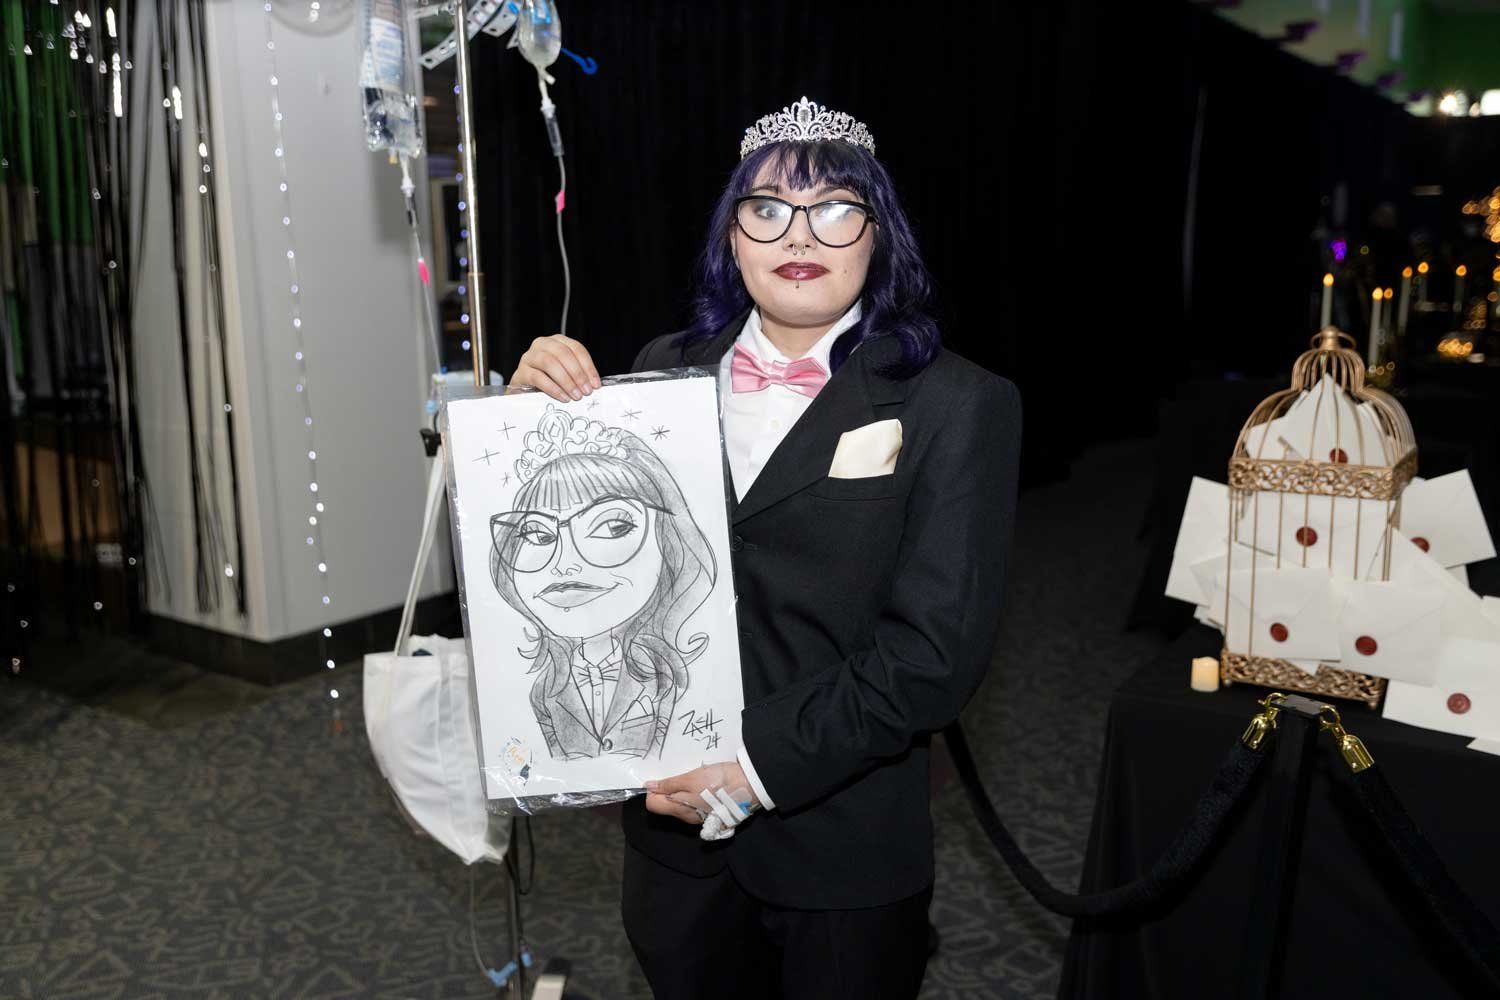 At the U C S F Benioff Children's Hospital Oakland's prom event, a young teenage girl wearing a suit, bow tie, and tiara holds a caricature portrait of herself. Next to her is her IV pole, and prom decorations are in the background.